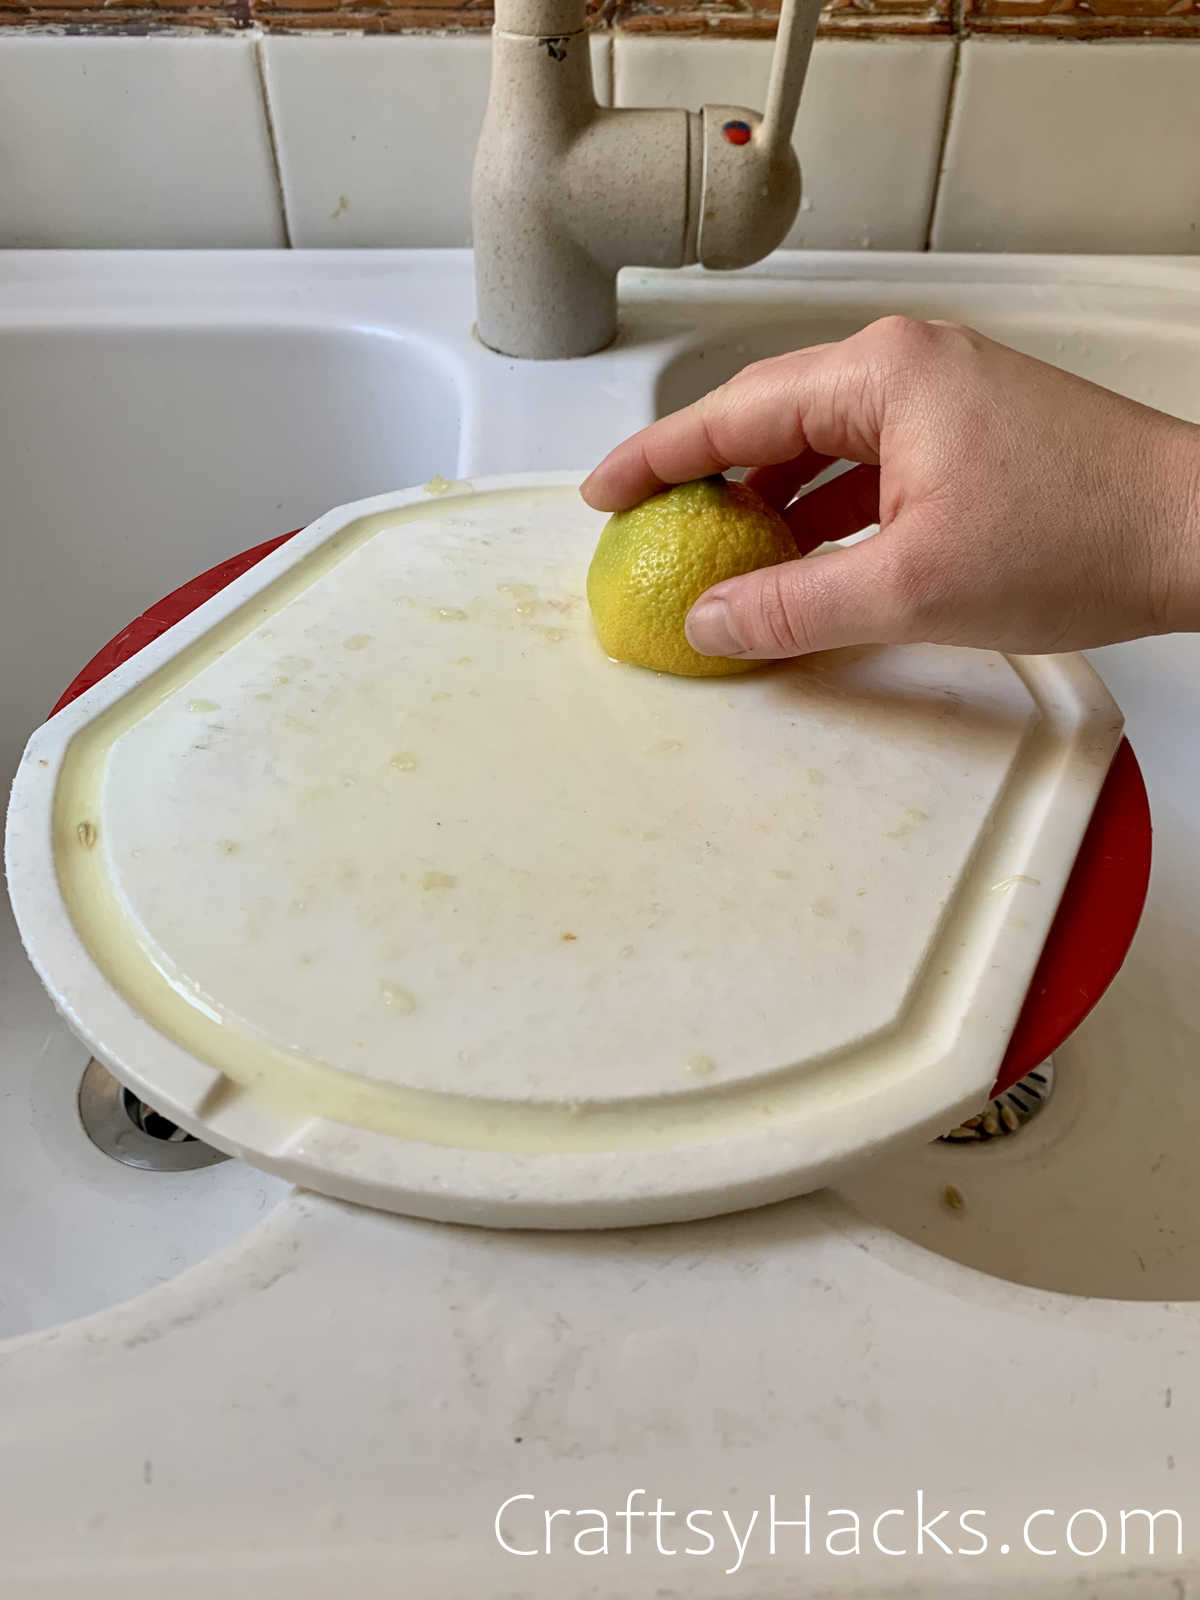 clean cutting boards with lemons